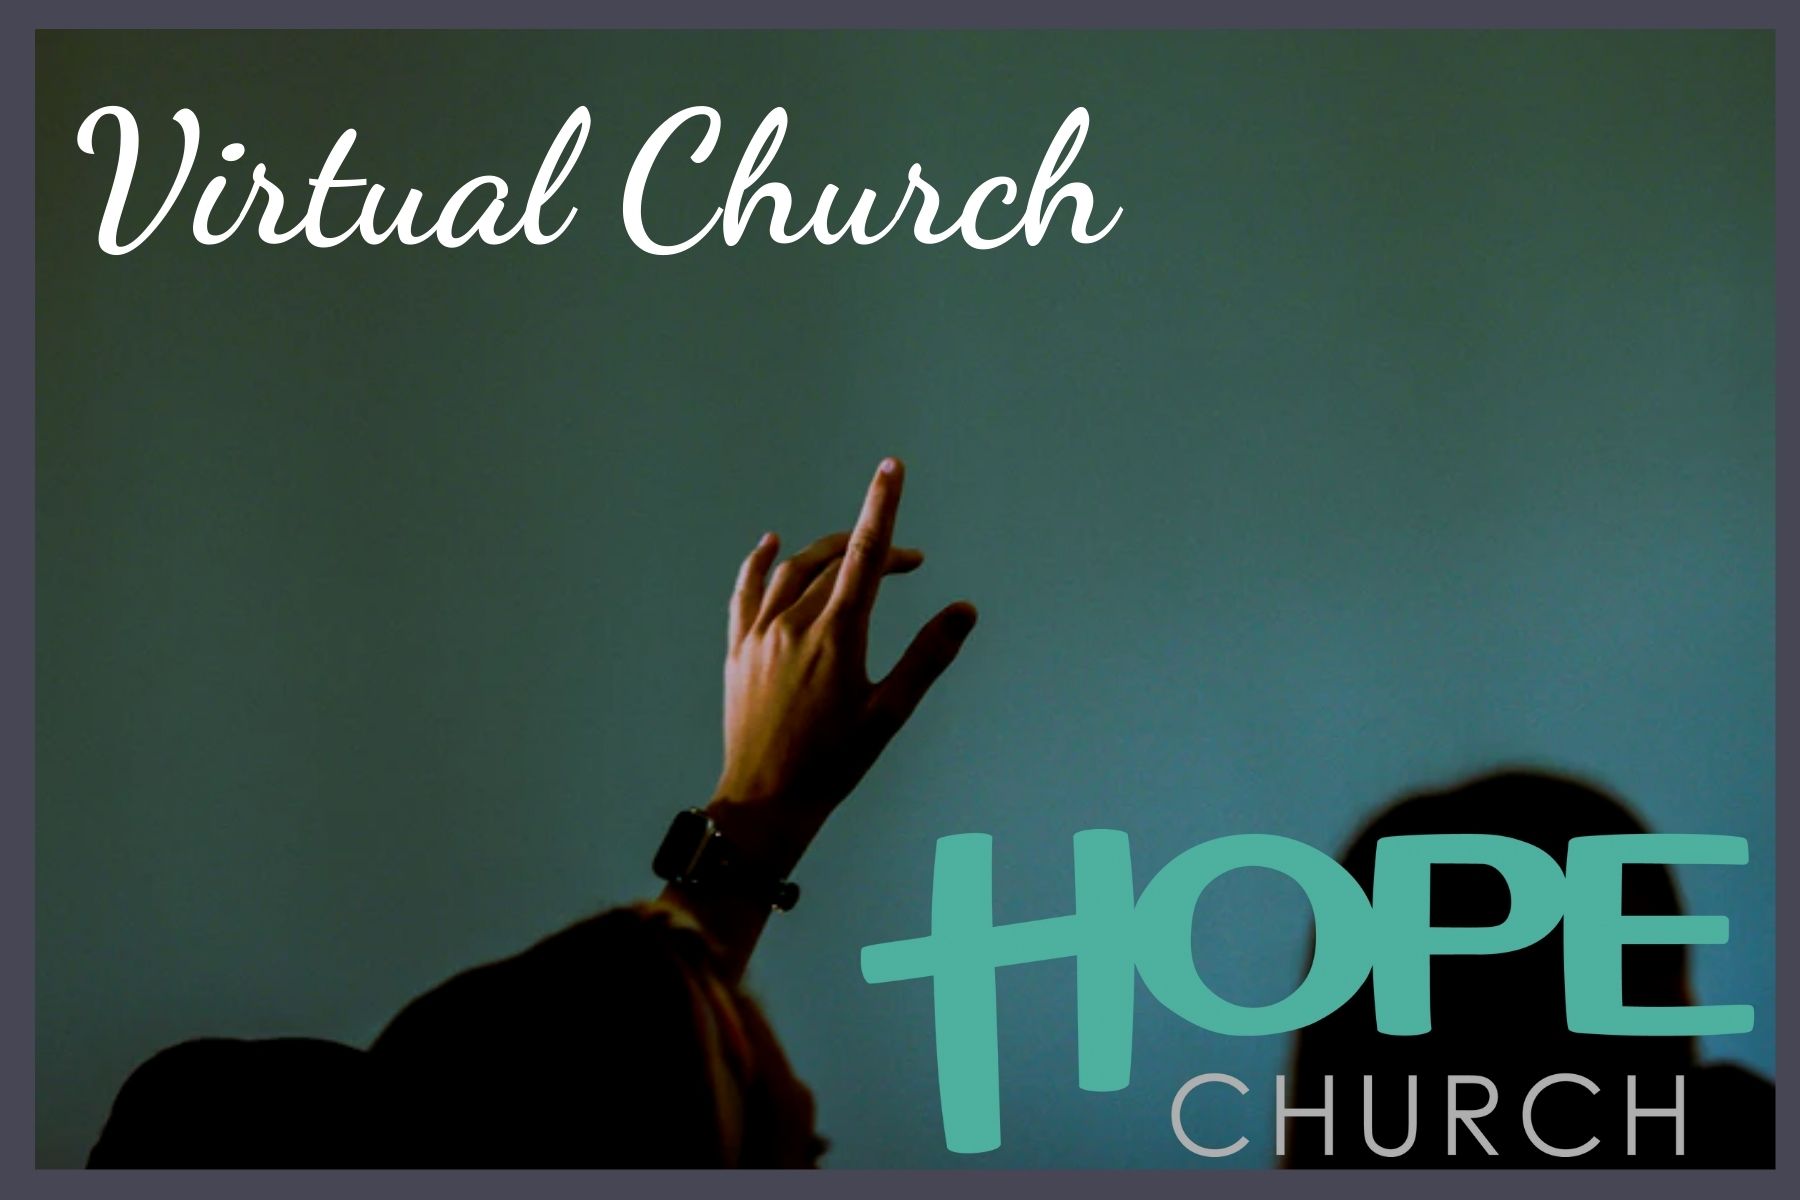 Watch our vitual services online here